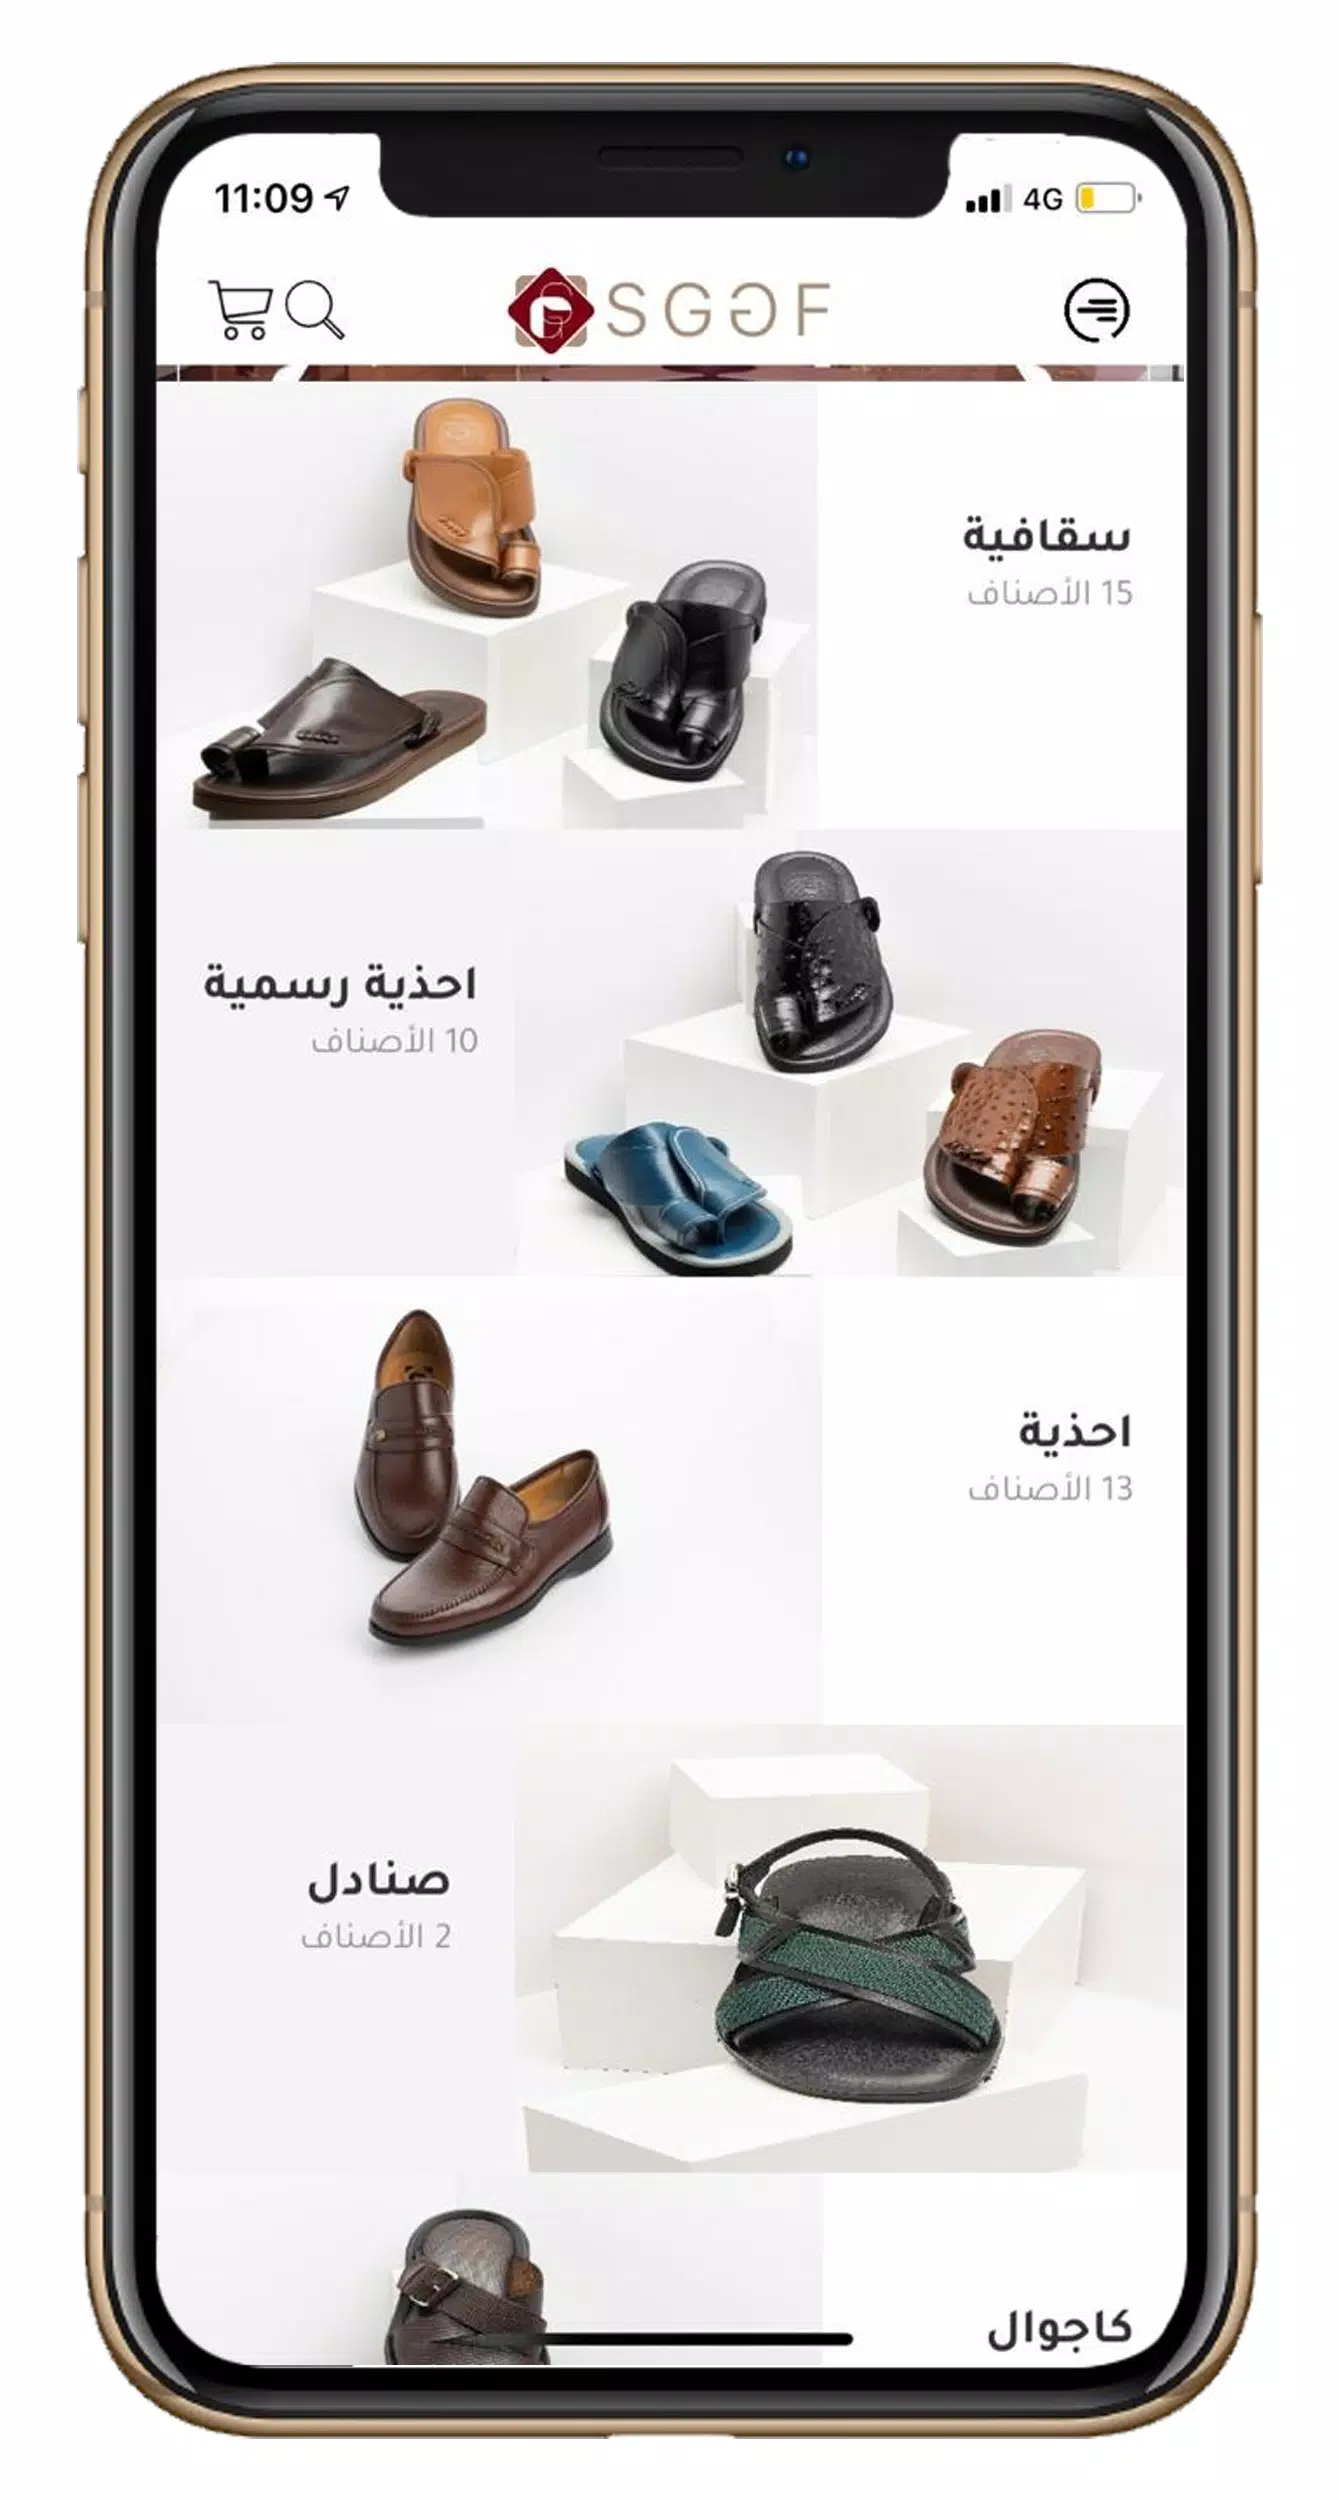 Saggaf Shoes for Android - APK Download